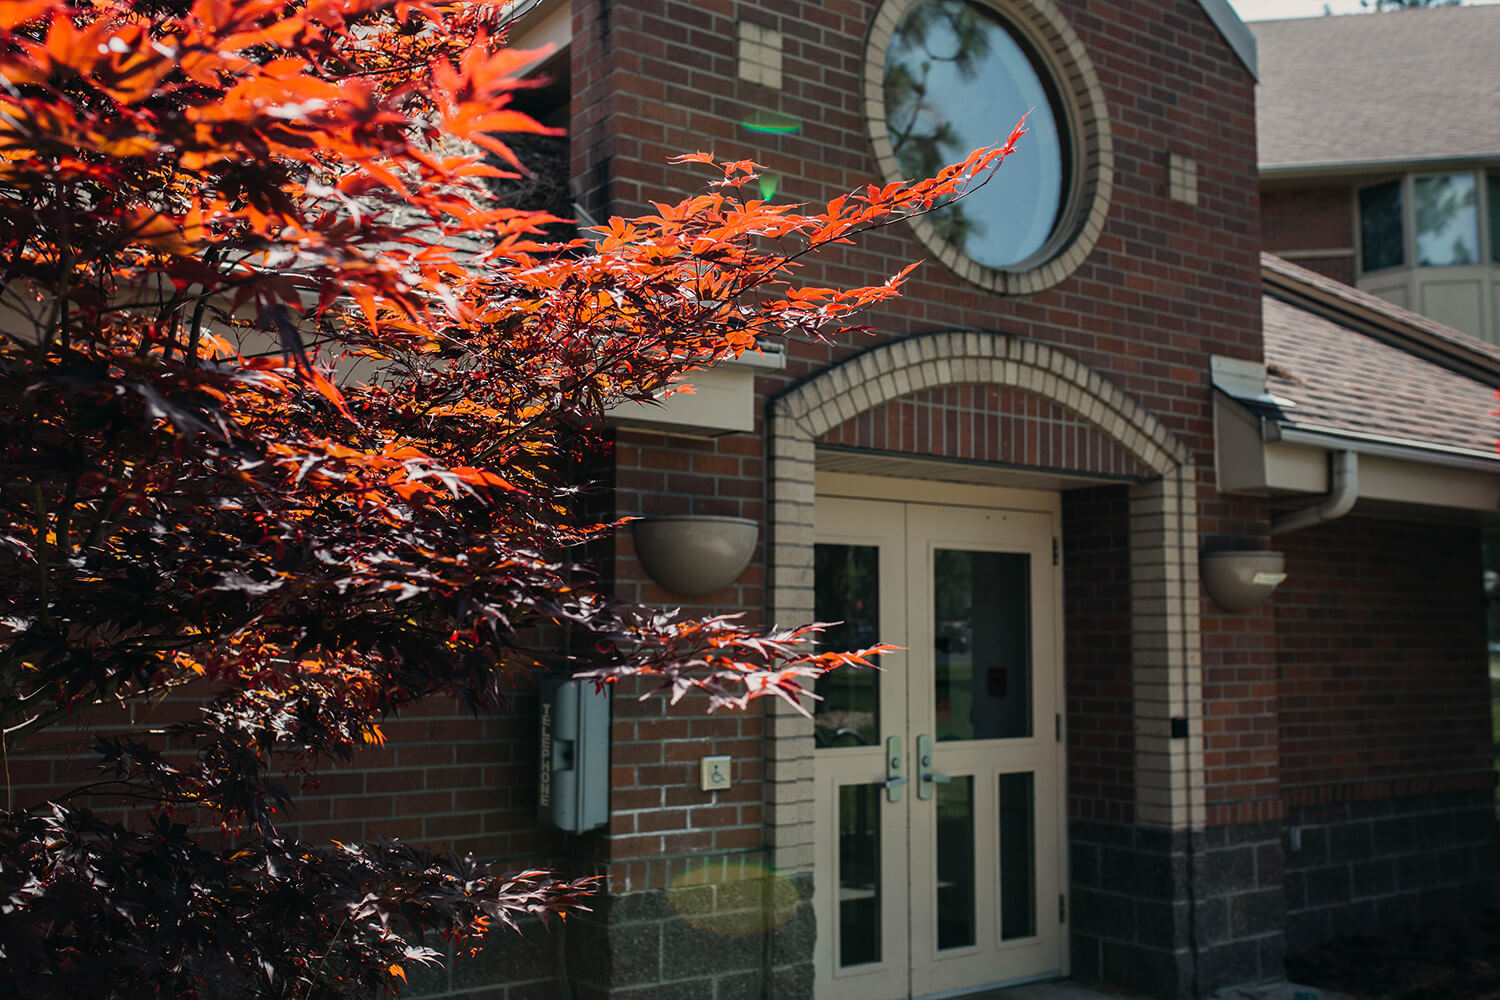 Close-up of the entry doors to a stately brick residence hall with a nearby red maple tree catching sunlight.